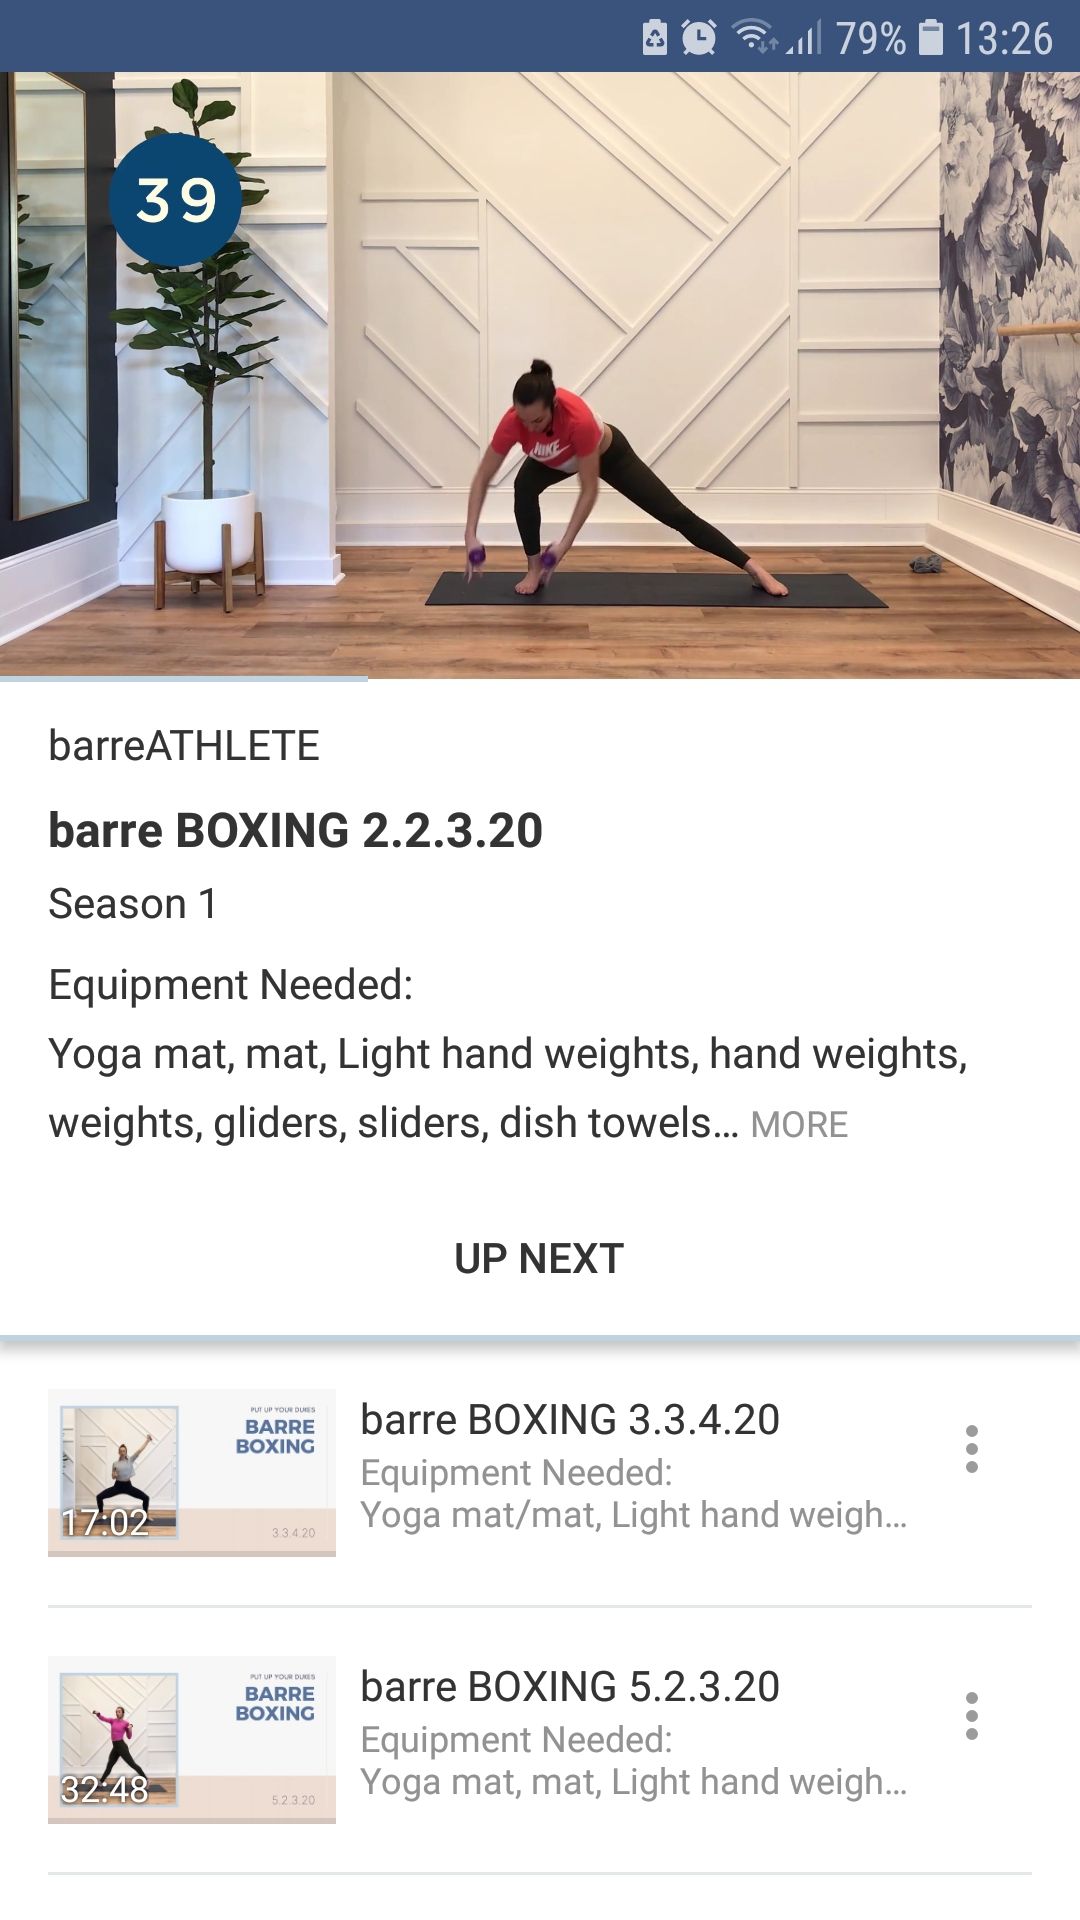 Get the Best Barre Workout for Strength and Tone With These 8 Apps